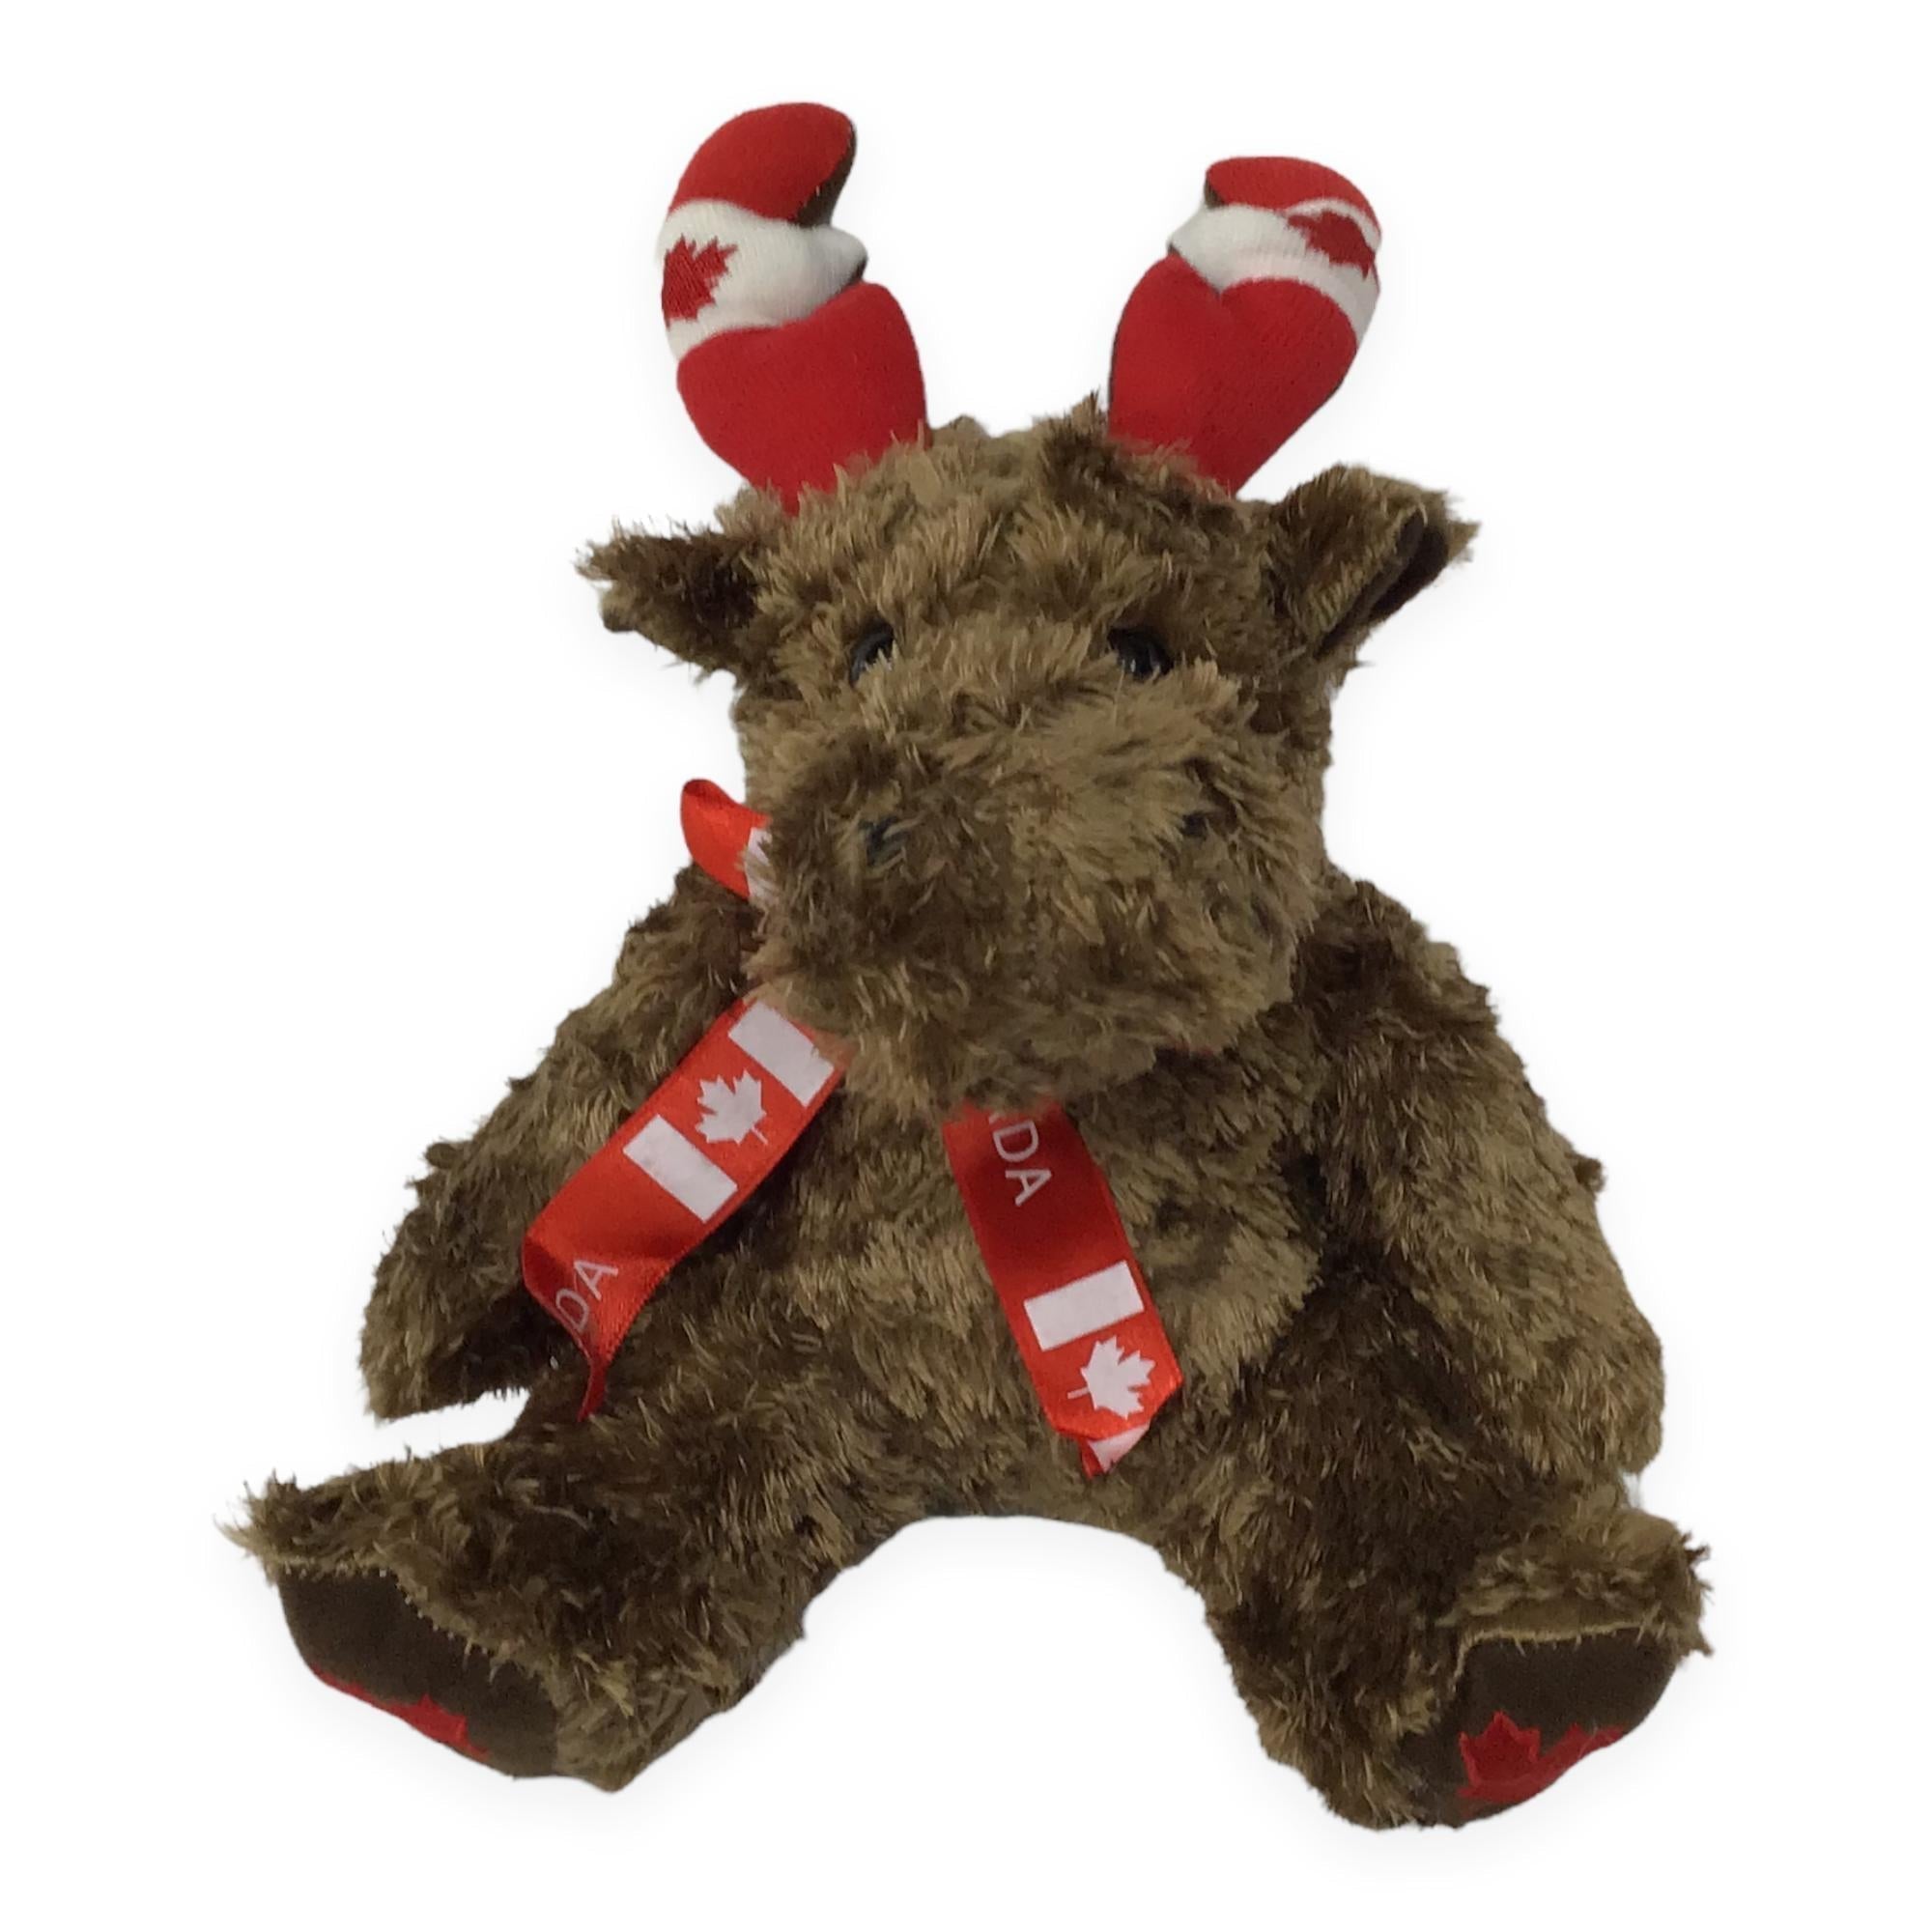 Canada Moose Plush Toy | 10” Inch Stuffed Animal Plush Toy with Scarf Around The Neck | Adorable Playtime Sitting Moose Plush Toy | Soft Stuffed Moose Animal Toys for Kids - Multicolor